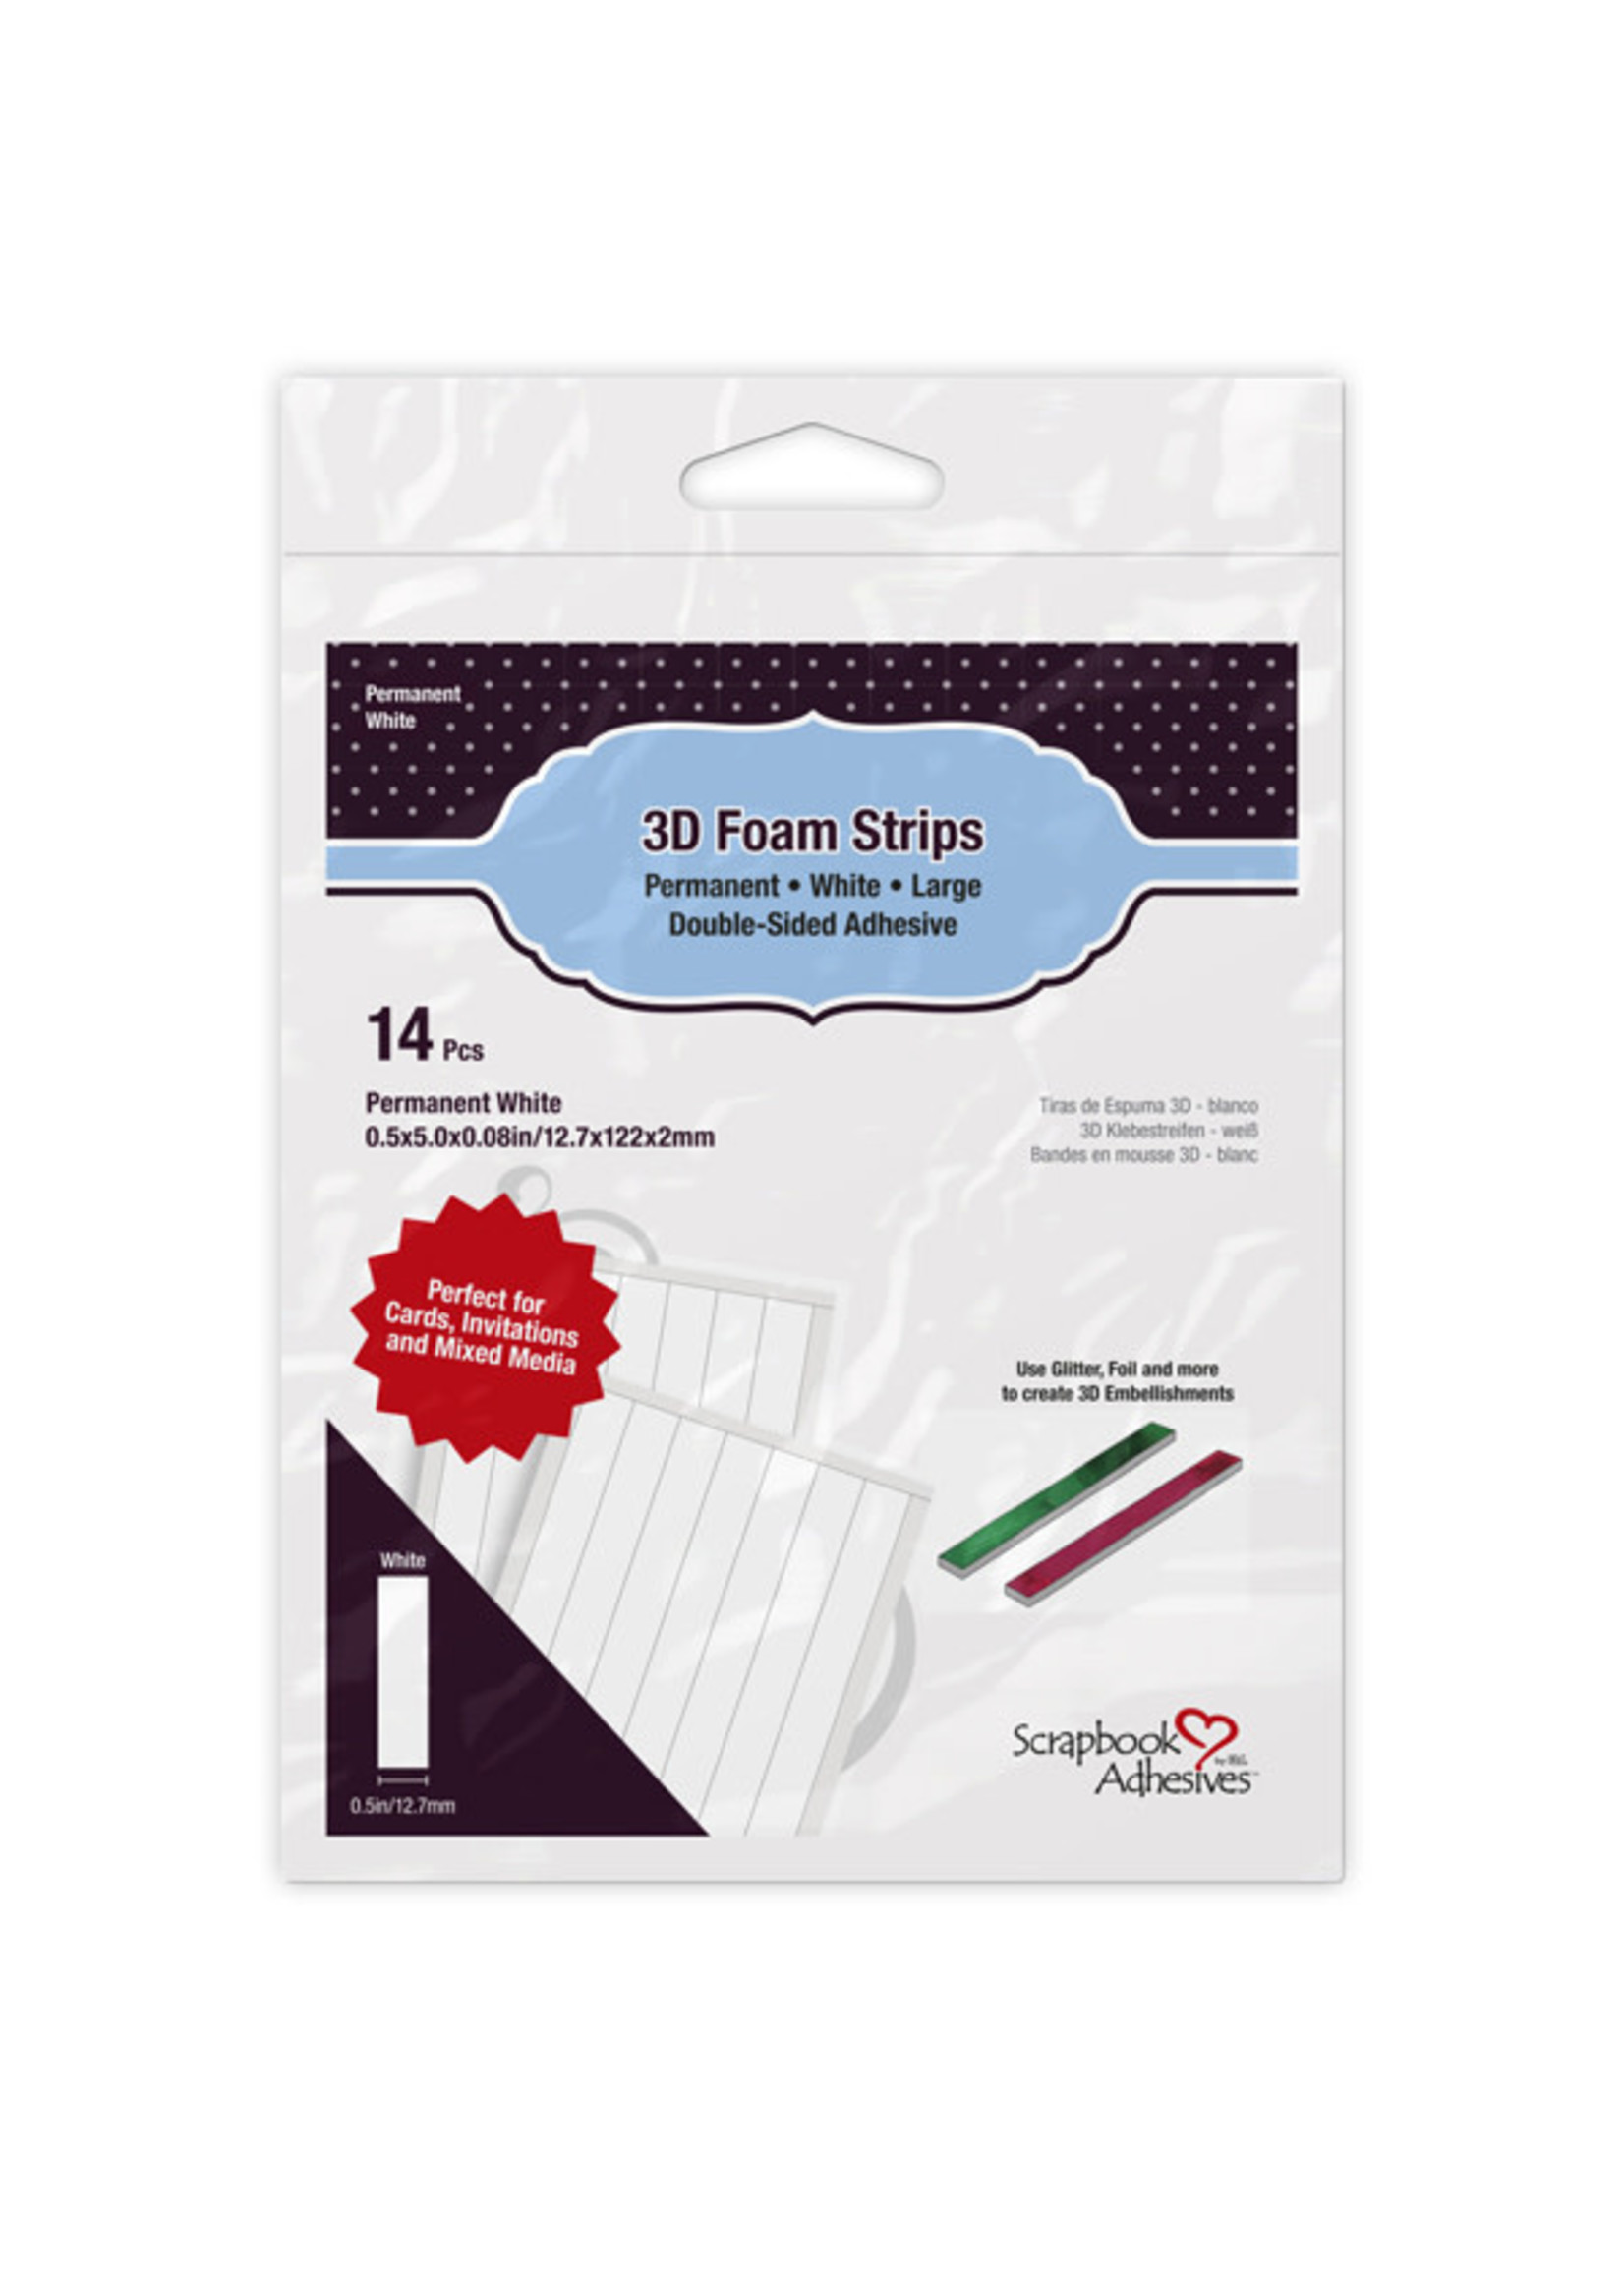 scrapbook adhesives 3D Foam Strips:  White, Large 14 pieces